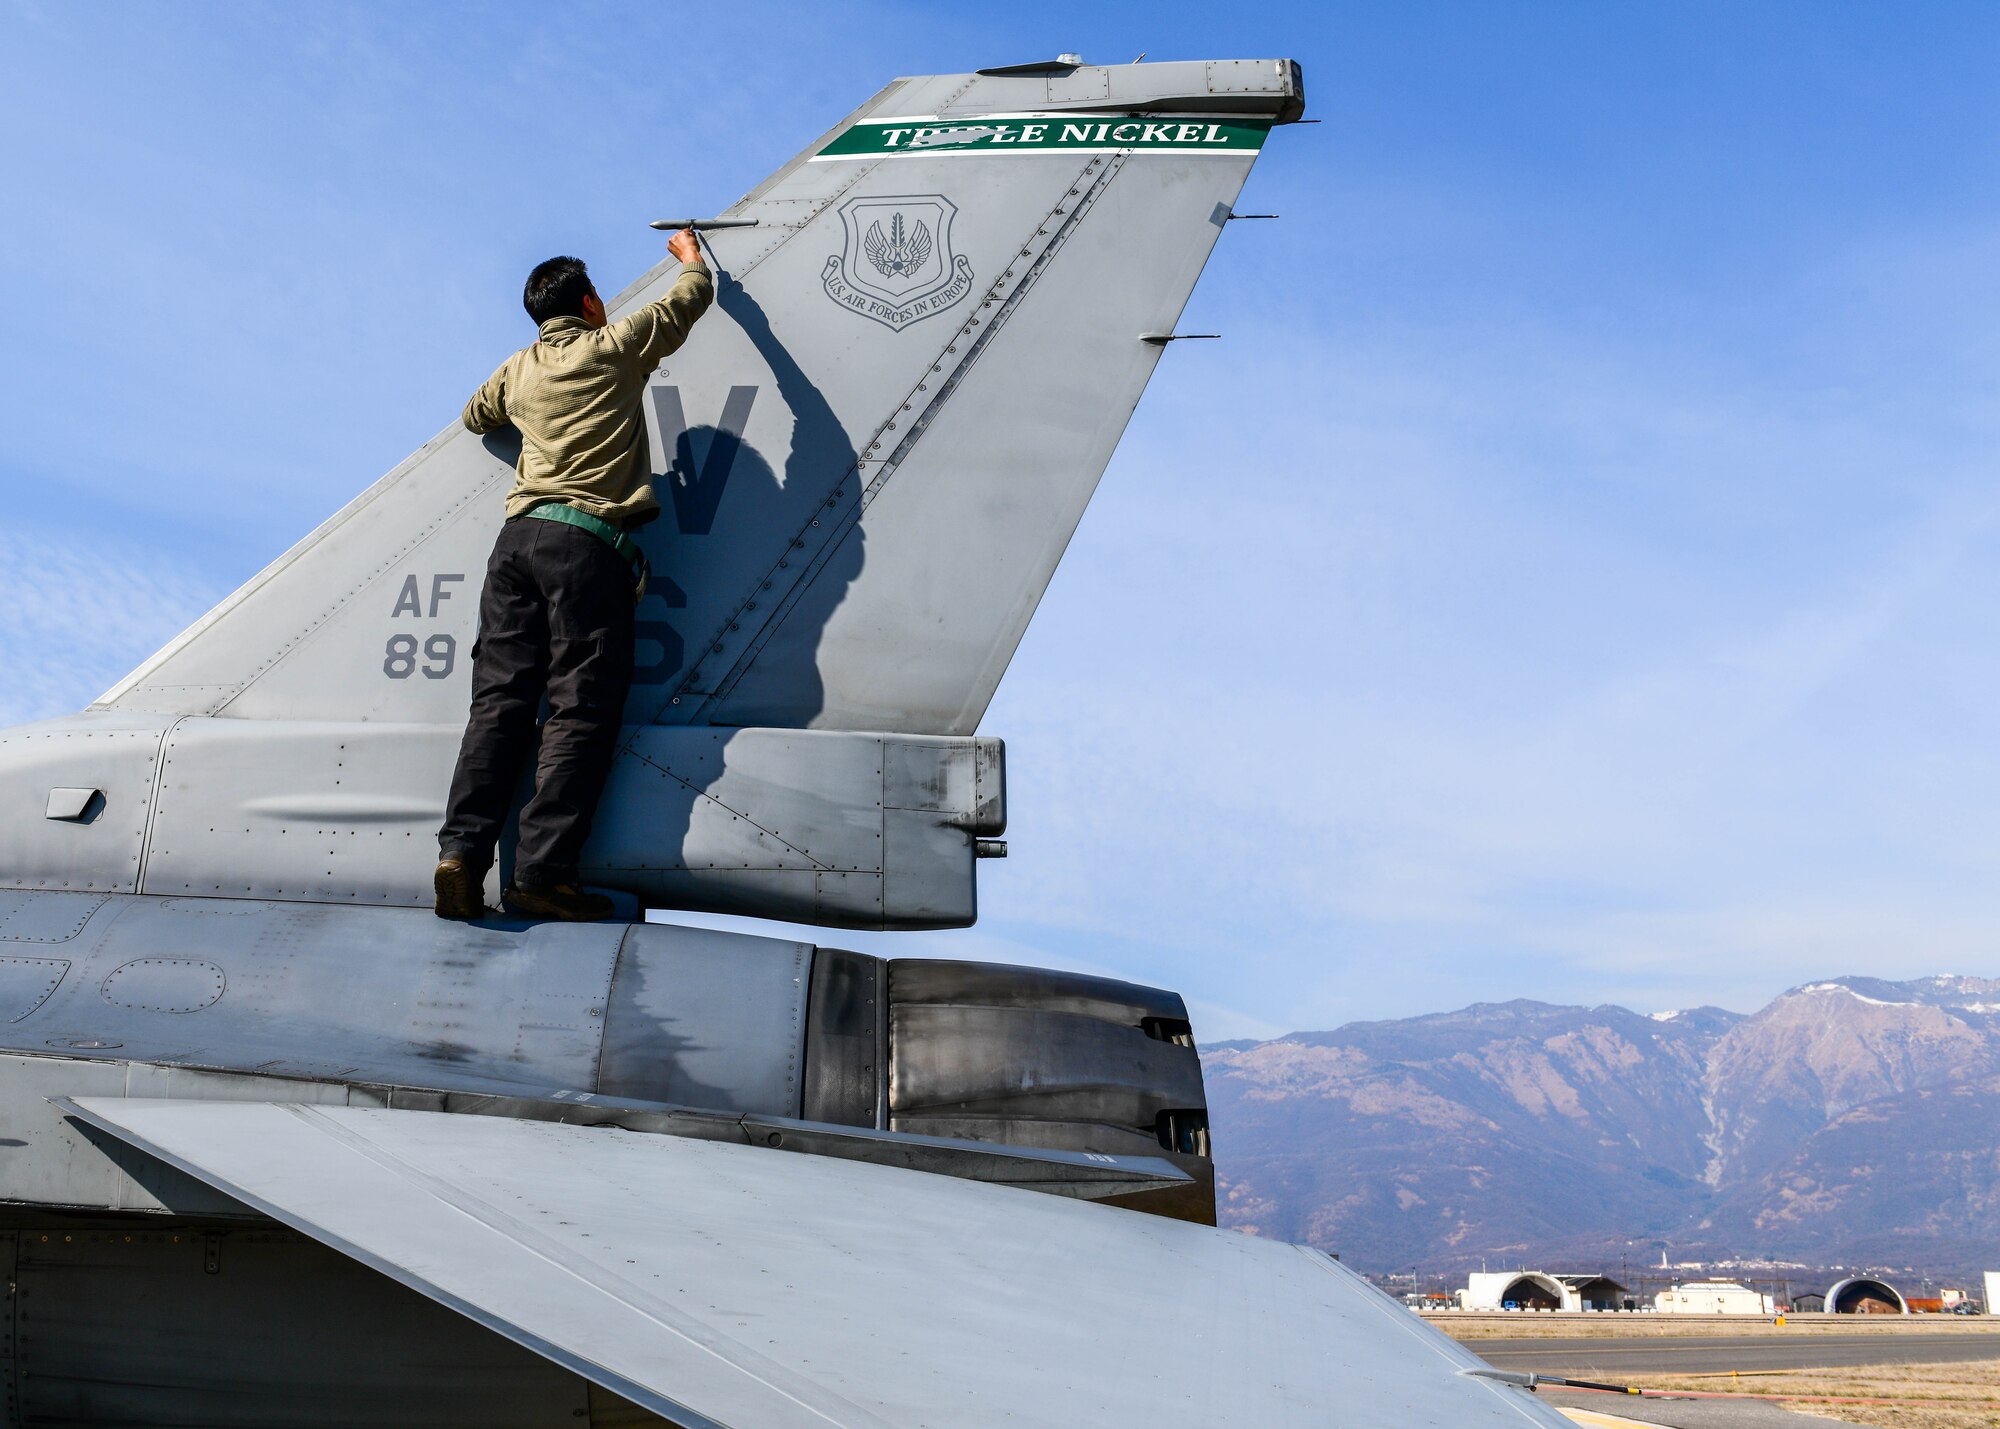 Airman 1st Class Derek Perez, 555th Aircraft Maintenance Unit F-16 Fighting Falcon crew chief, tightens screws on the tail of an F-16 assigned to the 555th Fighter Squadron at Aviano Air Base, Italy, March 2, 2022. The maintenance performed ensures continued support for NATO’s enhanced air policing mission. The 555th AMU’s operations support NATO’s statement of Alliance resolve and cohesion during enhanced air policing. (U.S. Air Force photo by Senior Airman Brooke Moeder)